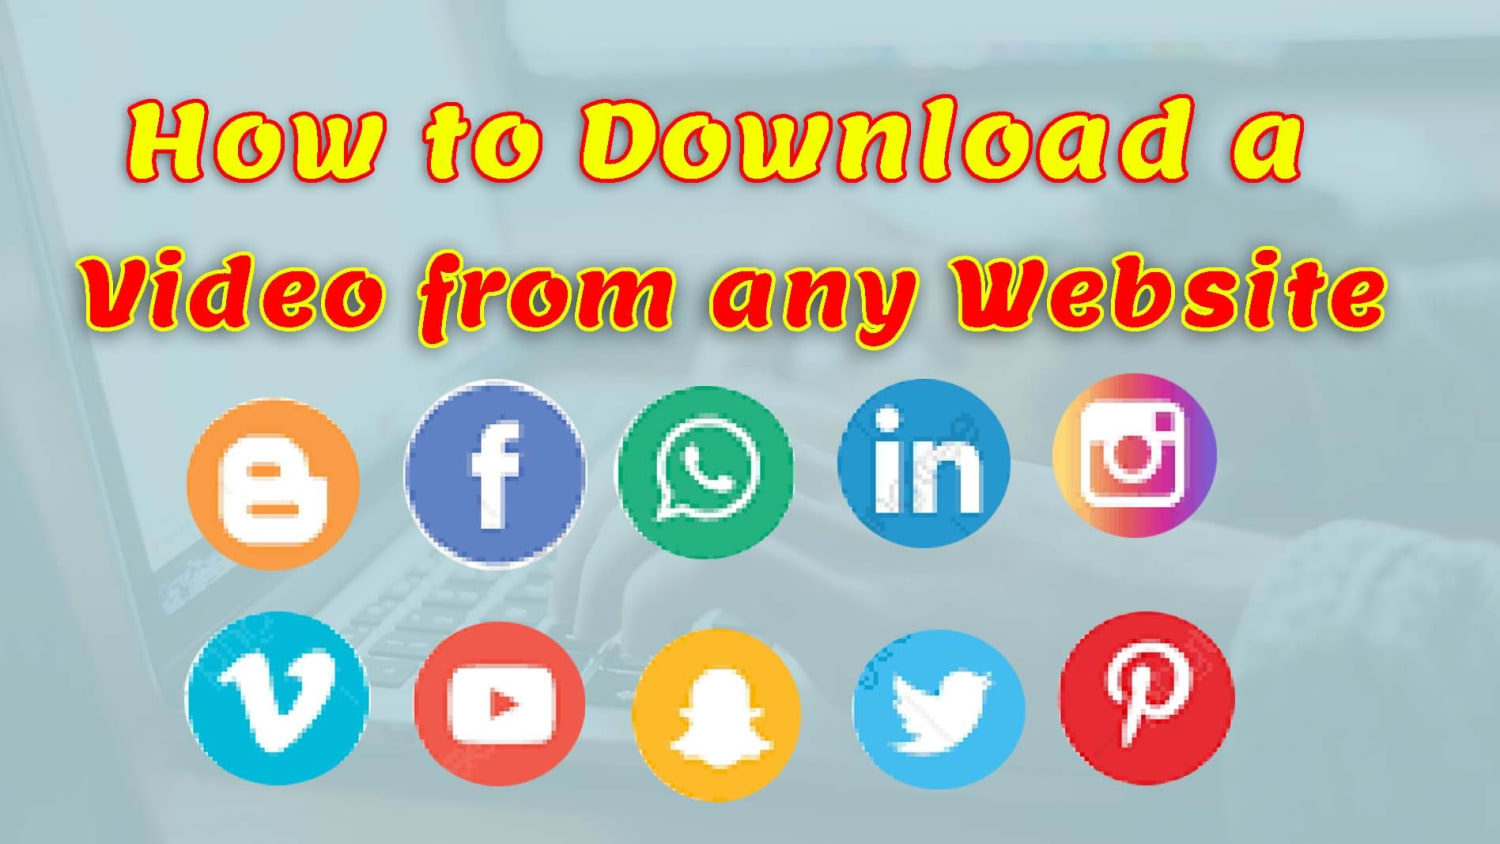 How to Download a Video from any Website